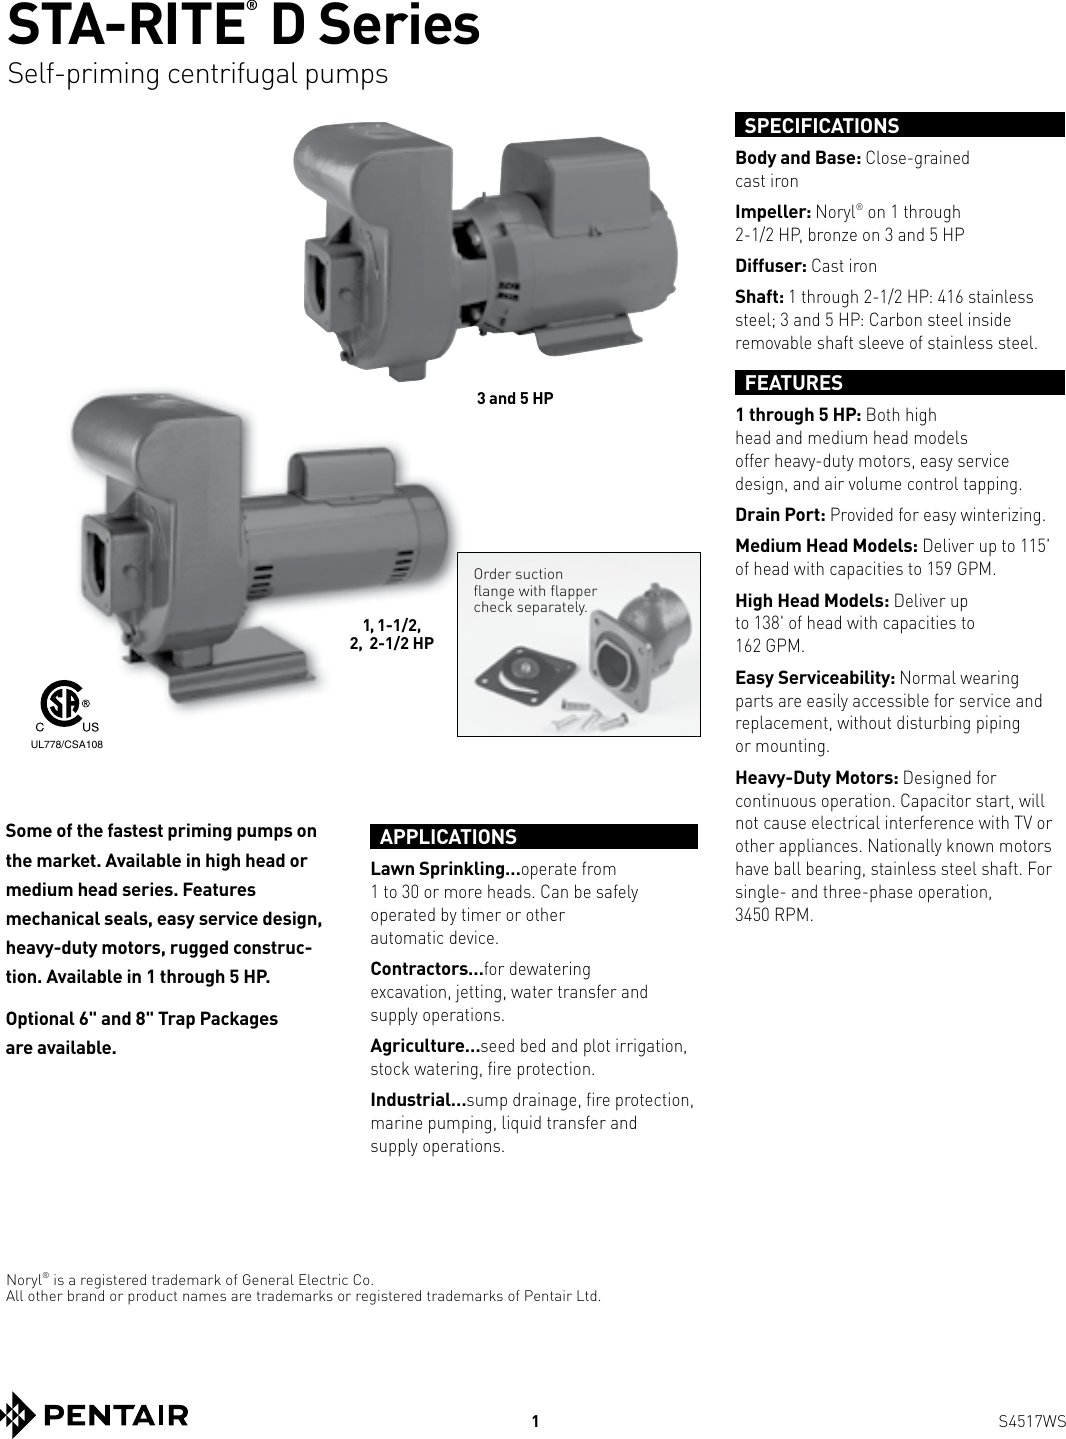 Page 1 of 4 - 539631 1 Sta-Rite D Series Centrifugal Pump Brochure